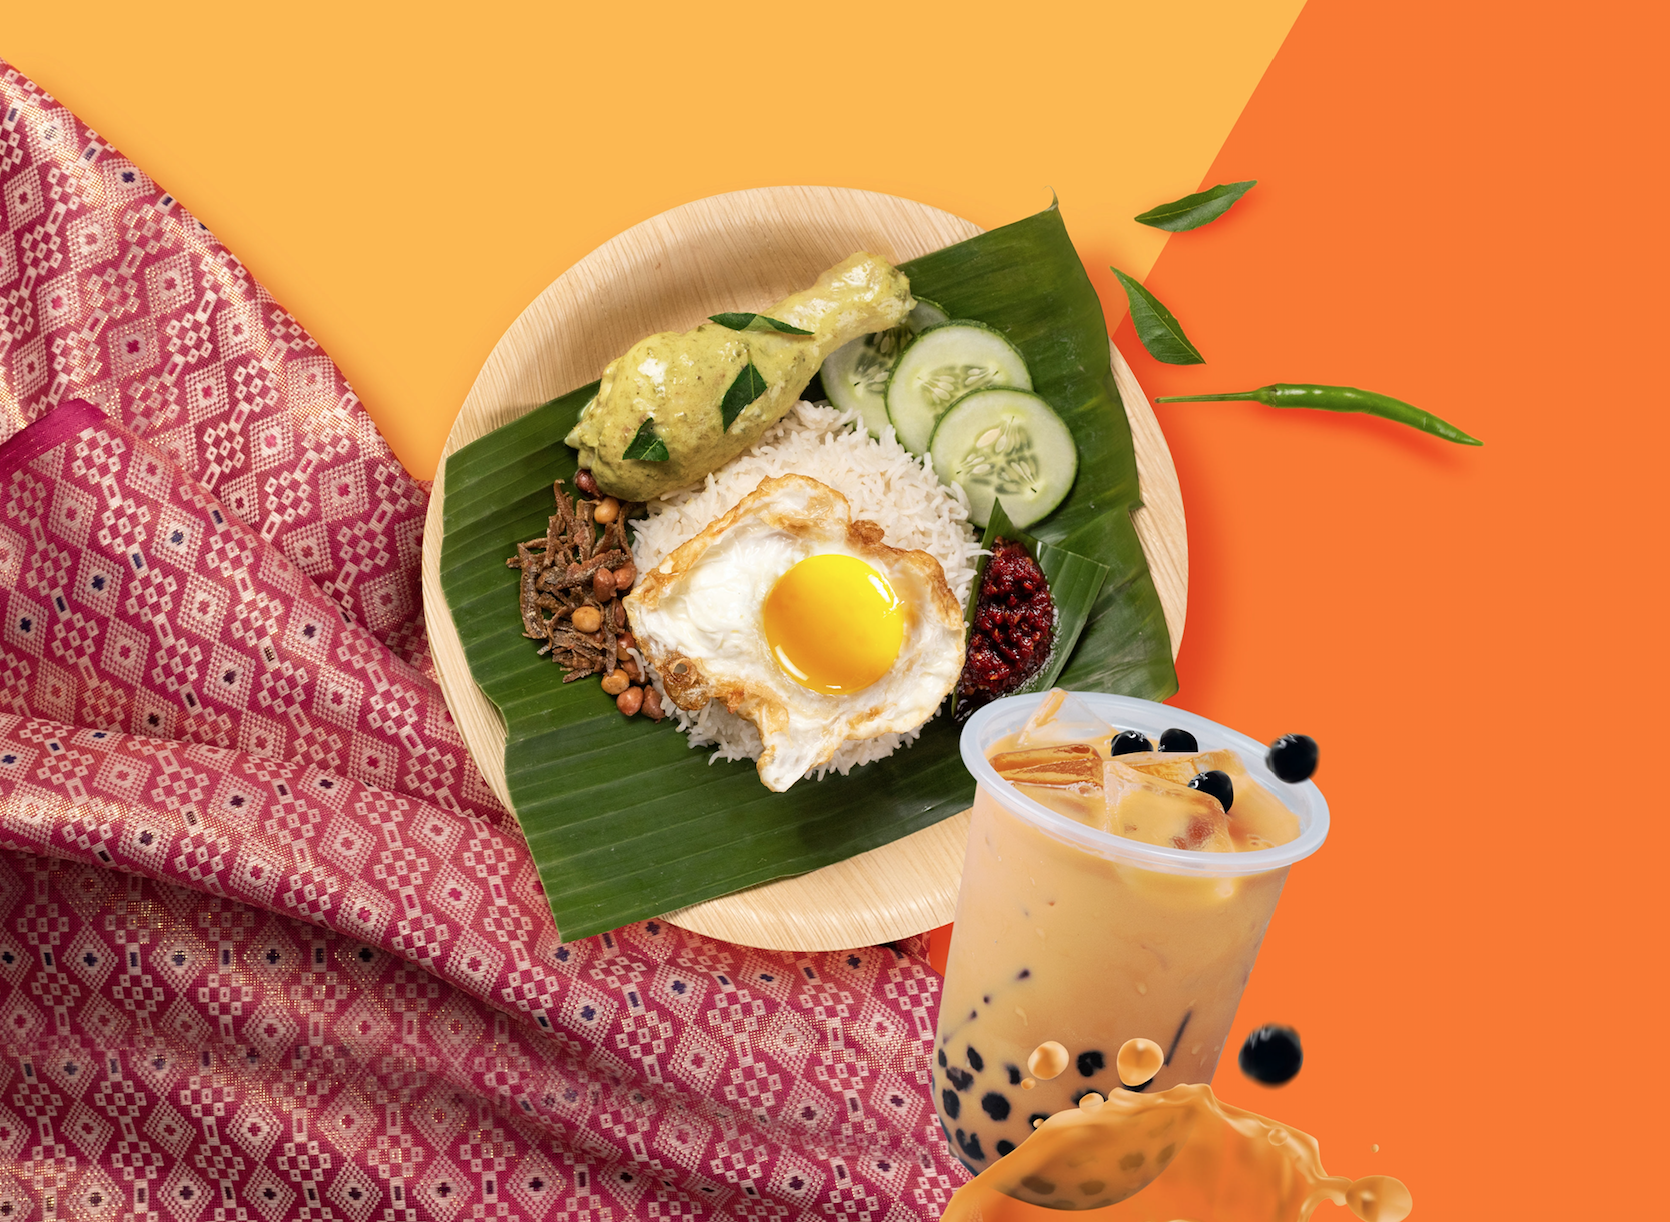 S'pore restaurant crave launches thai-style nasi lemak, comes with green curry and more